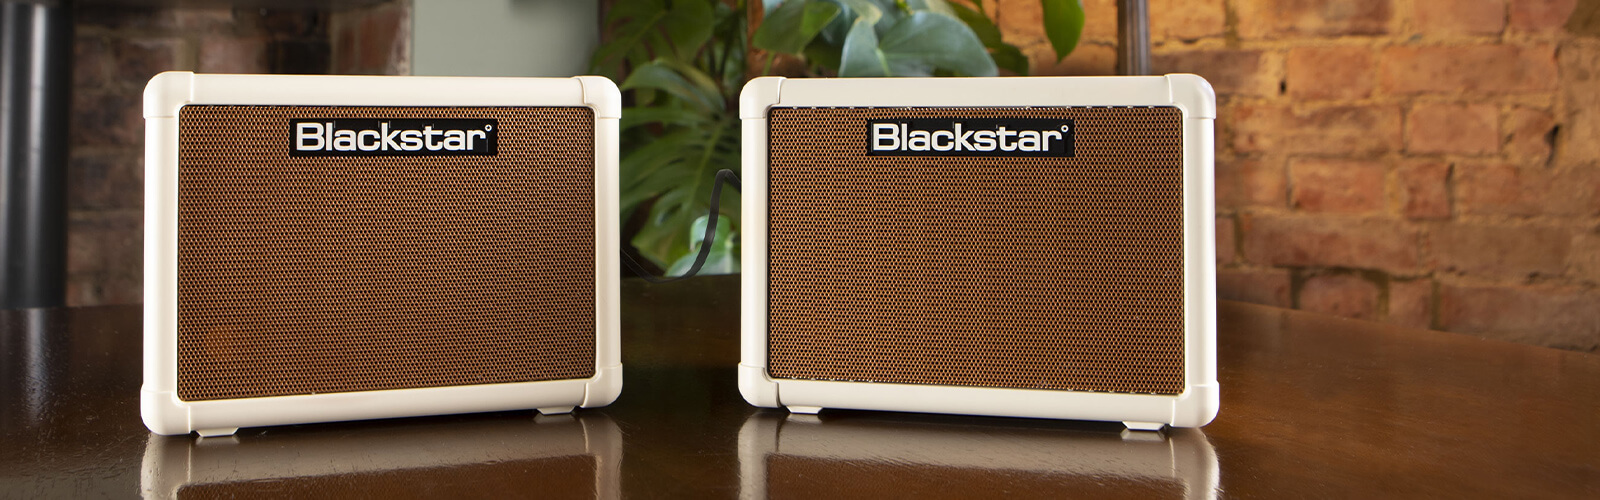 front view of 2 Blackstar guitar amps